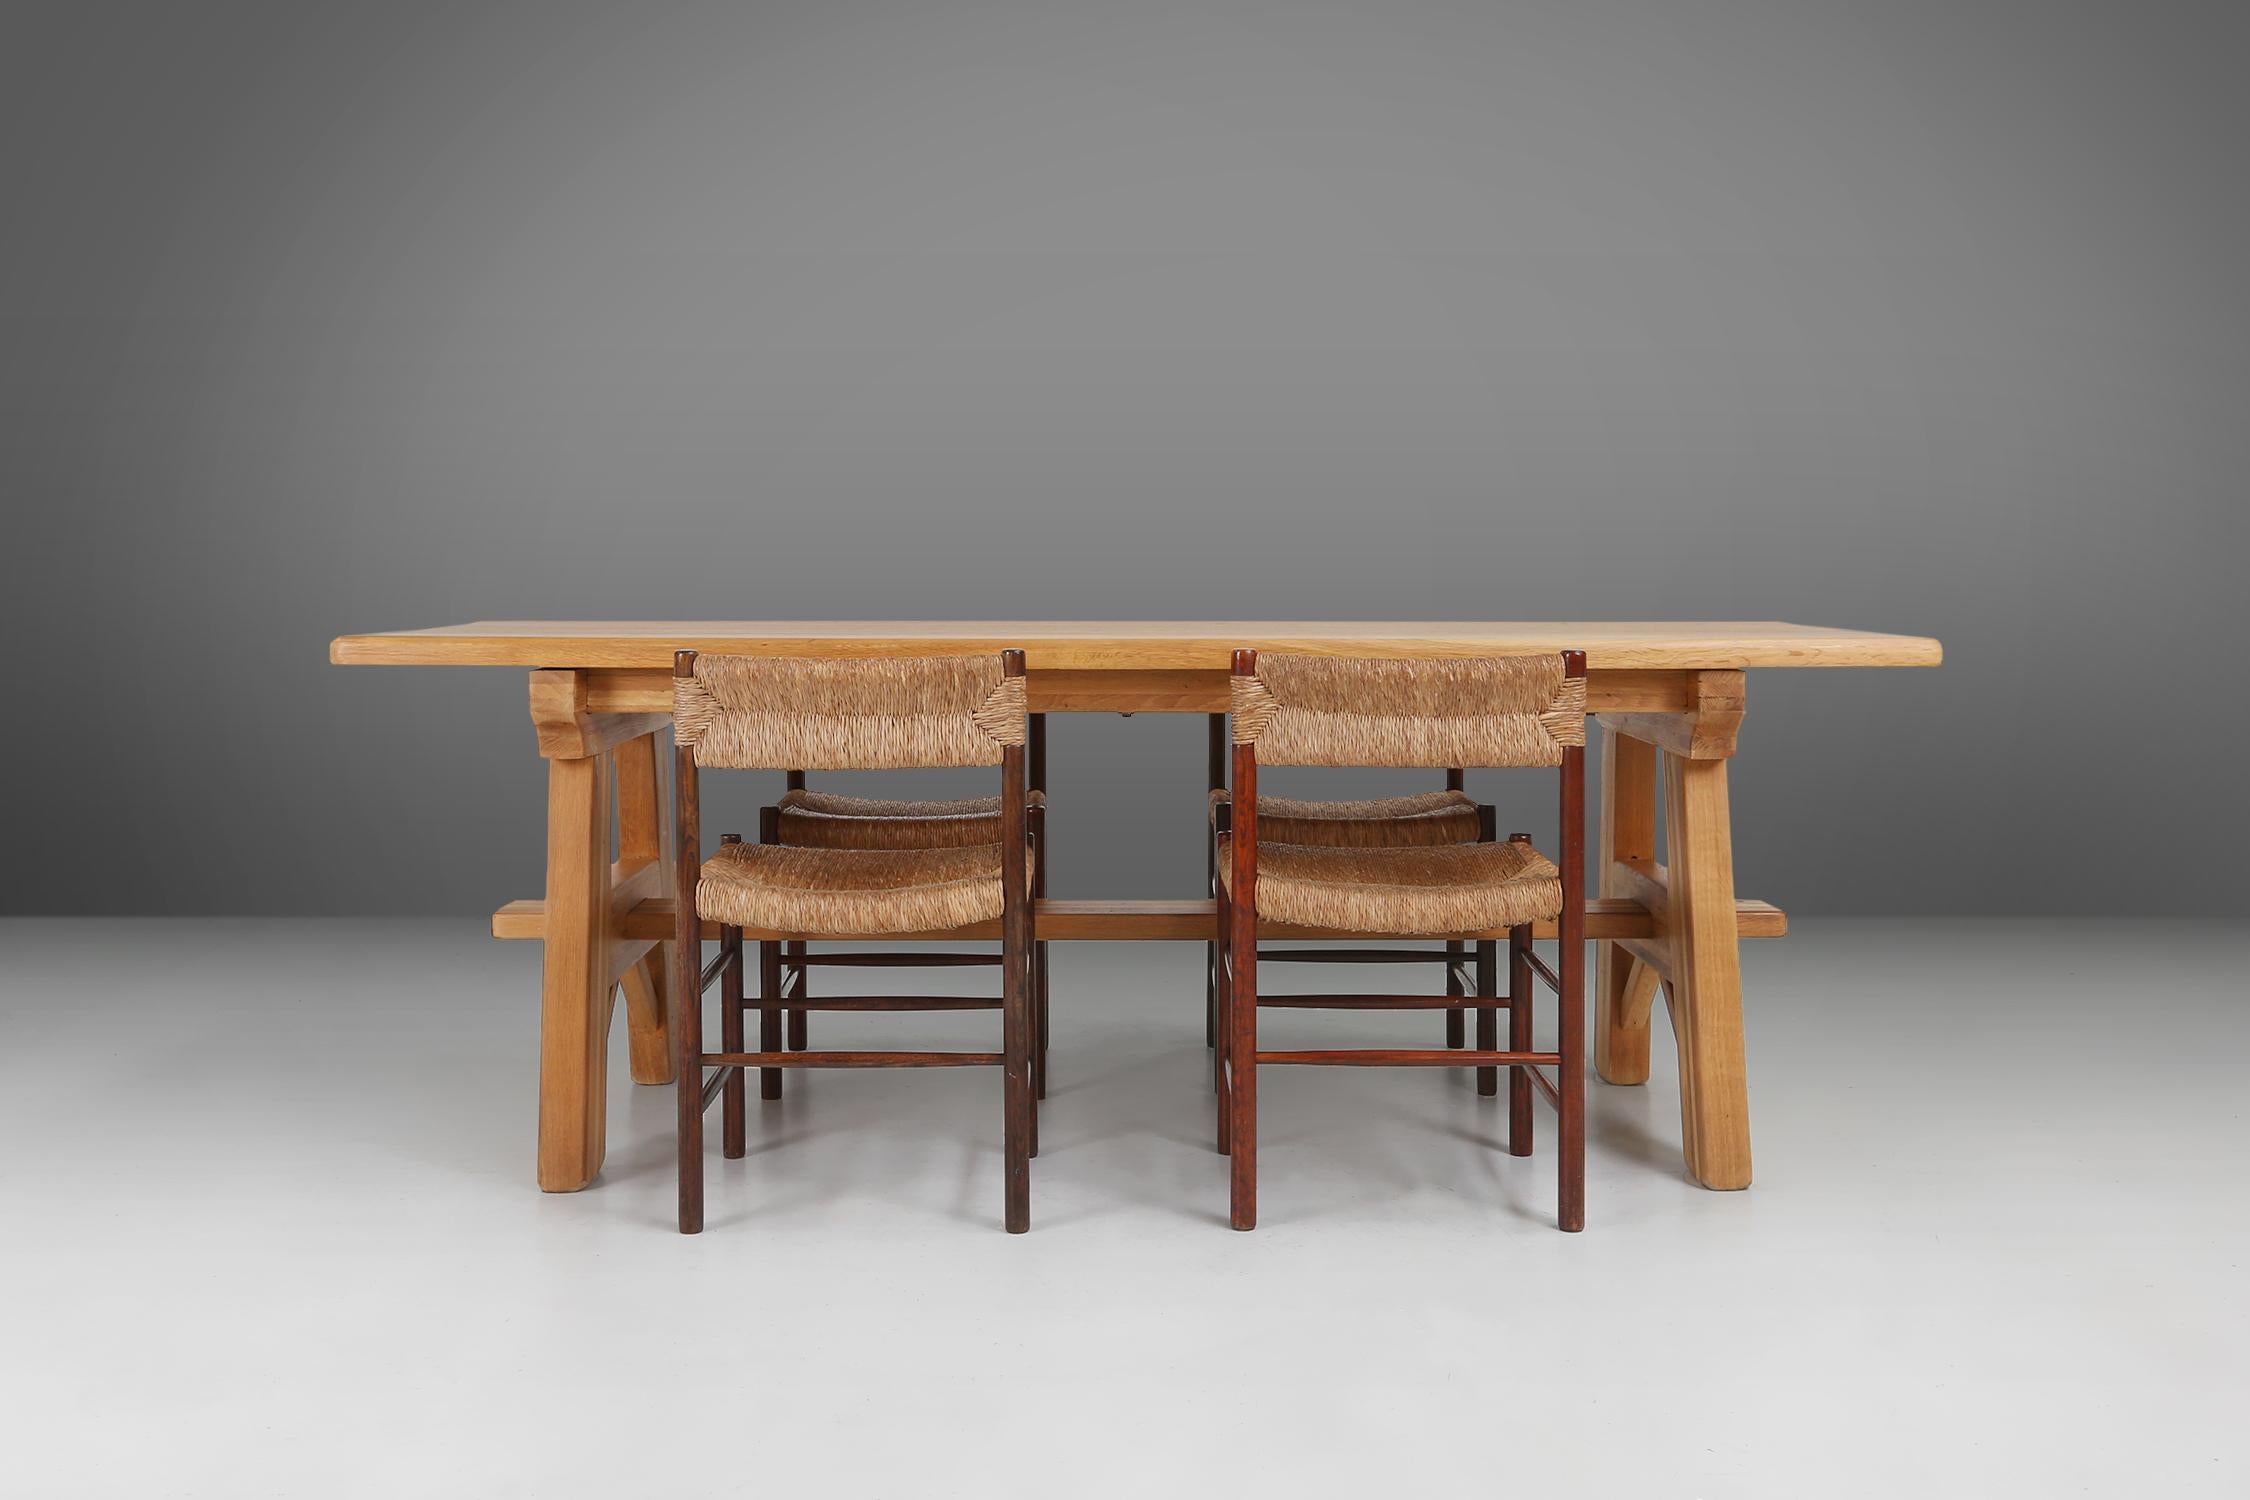 France / 1960 / dining table / oak / mid-century / design / vintage

A stylish dining or work table, crafted in solid blond oak with exposed joints, made in France in the sixties. The table provides ample space for 4 chairs. With a rich thick wooden